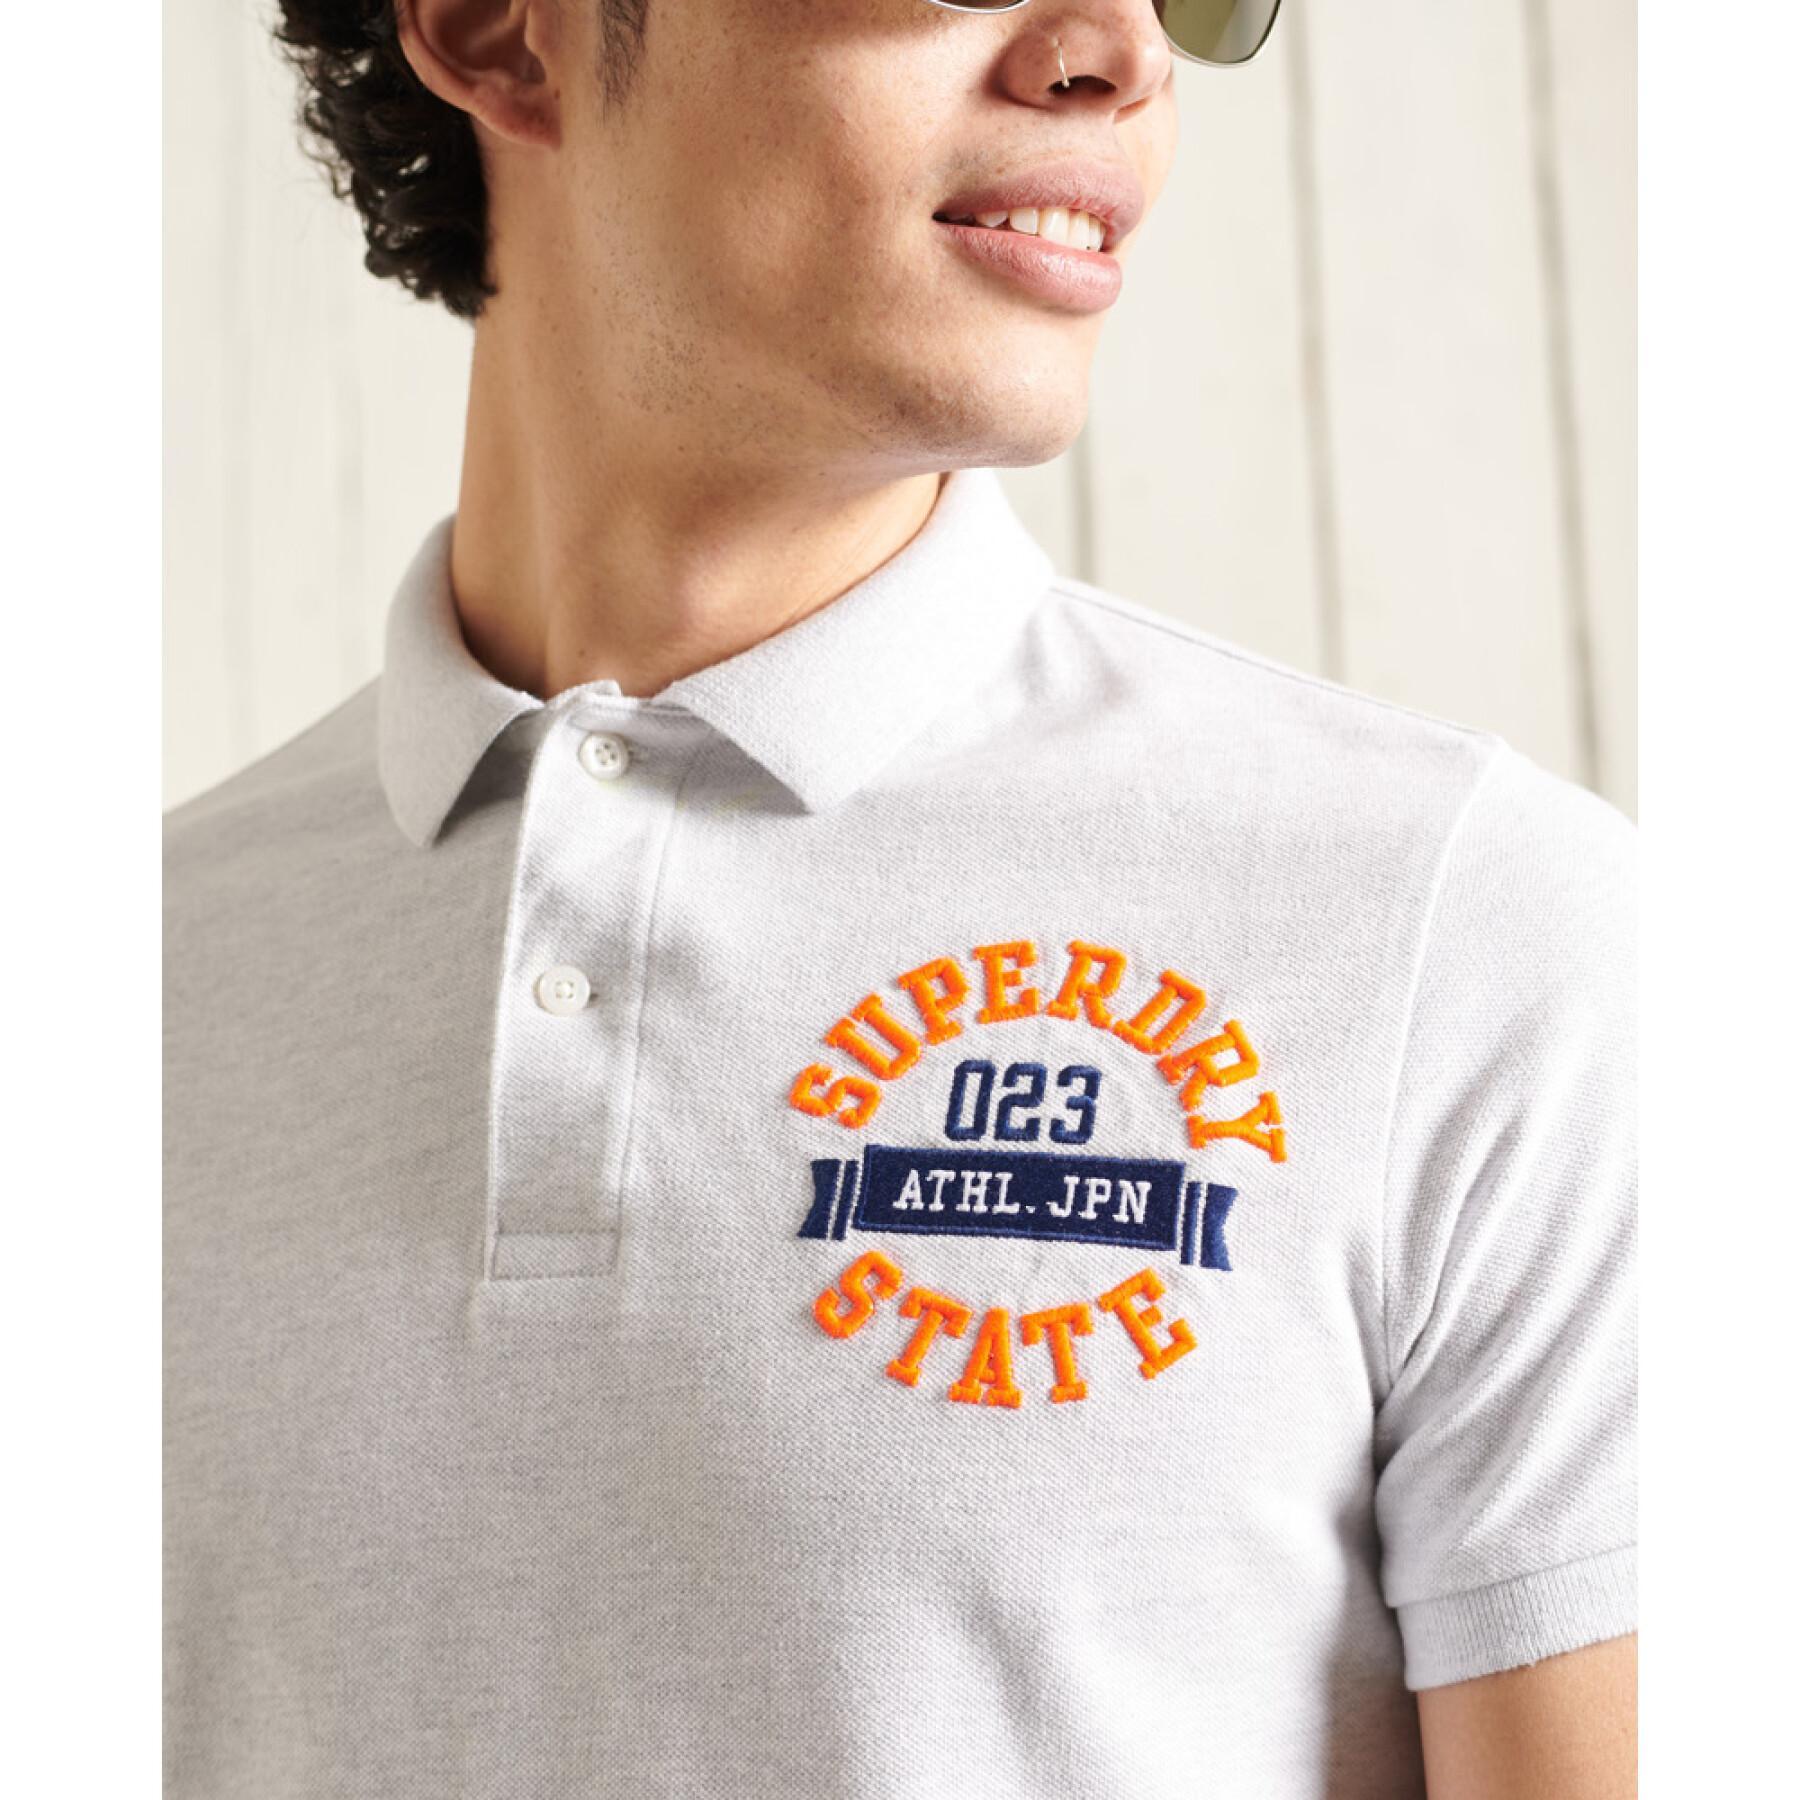 Polo Superdry Classic Superstate